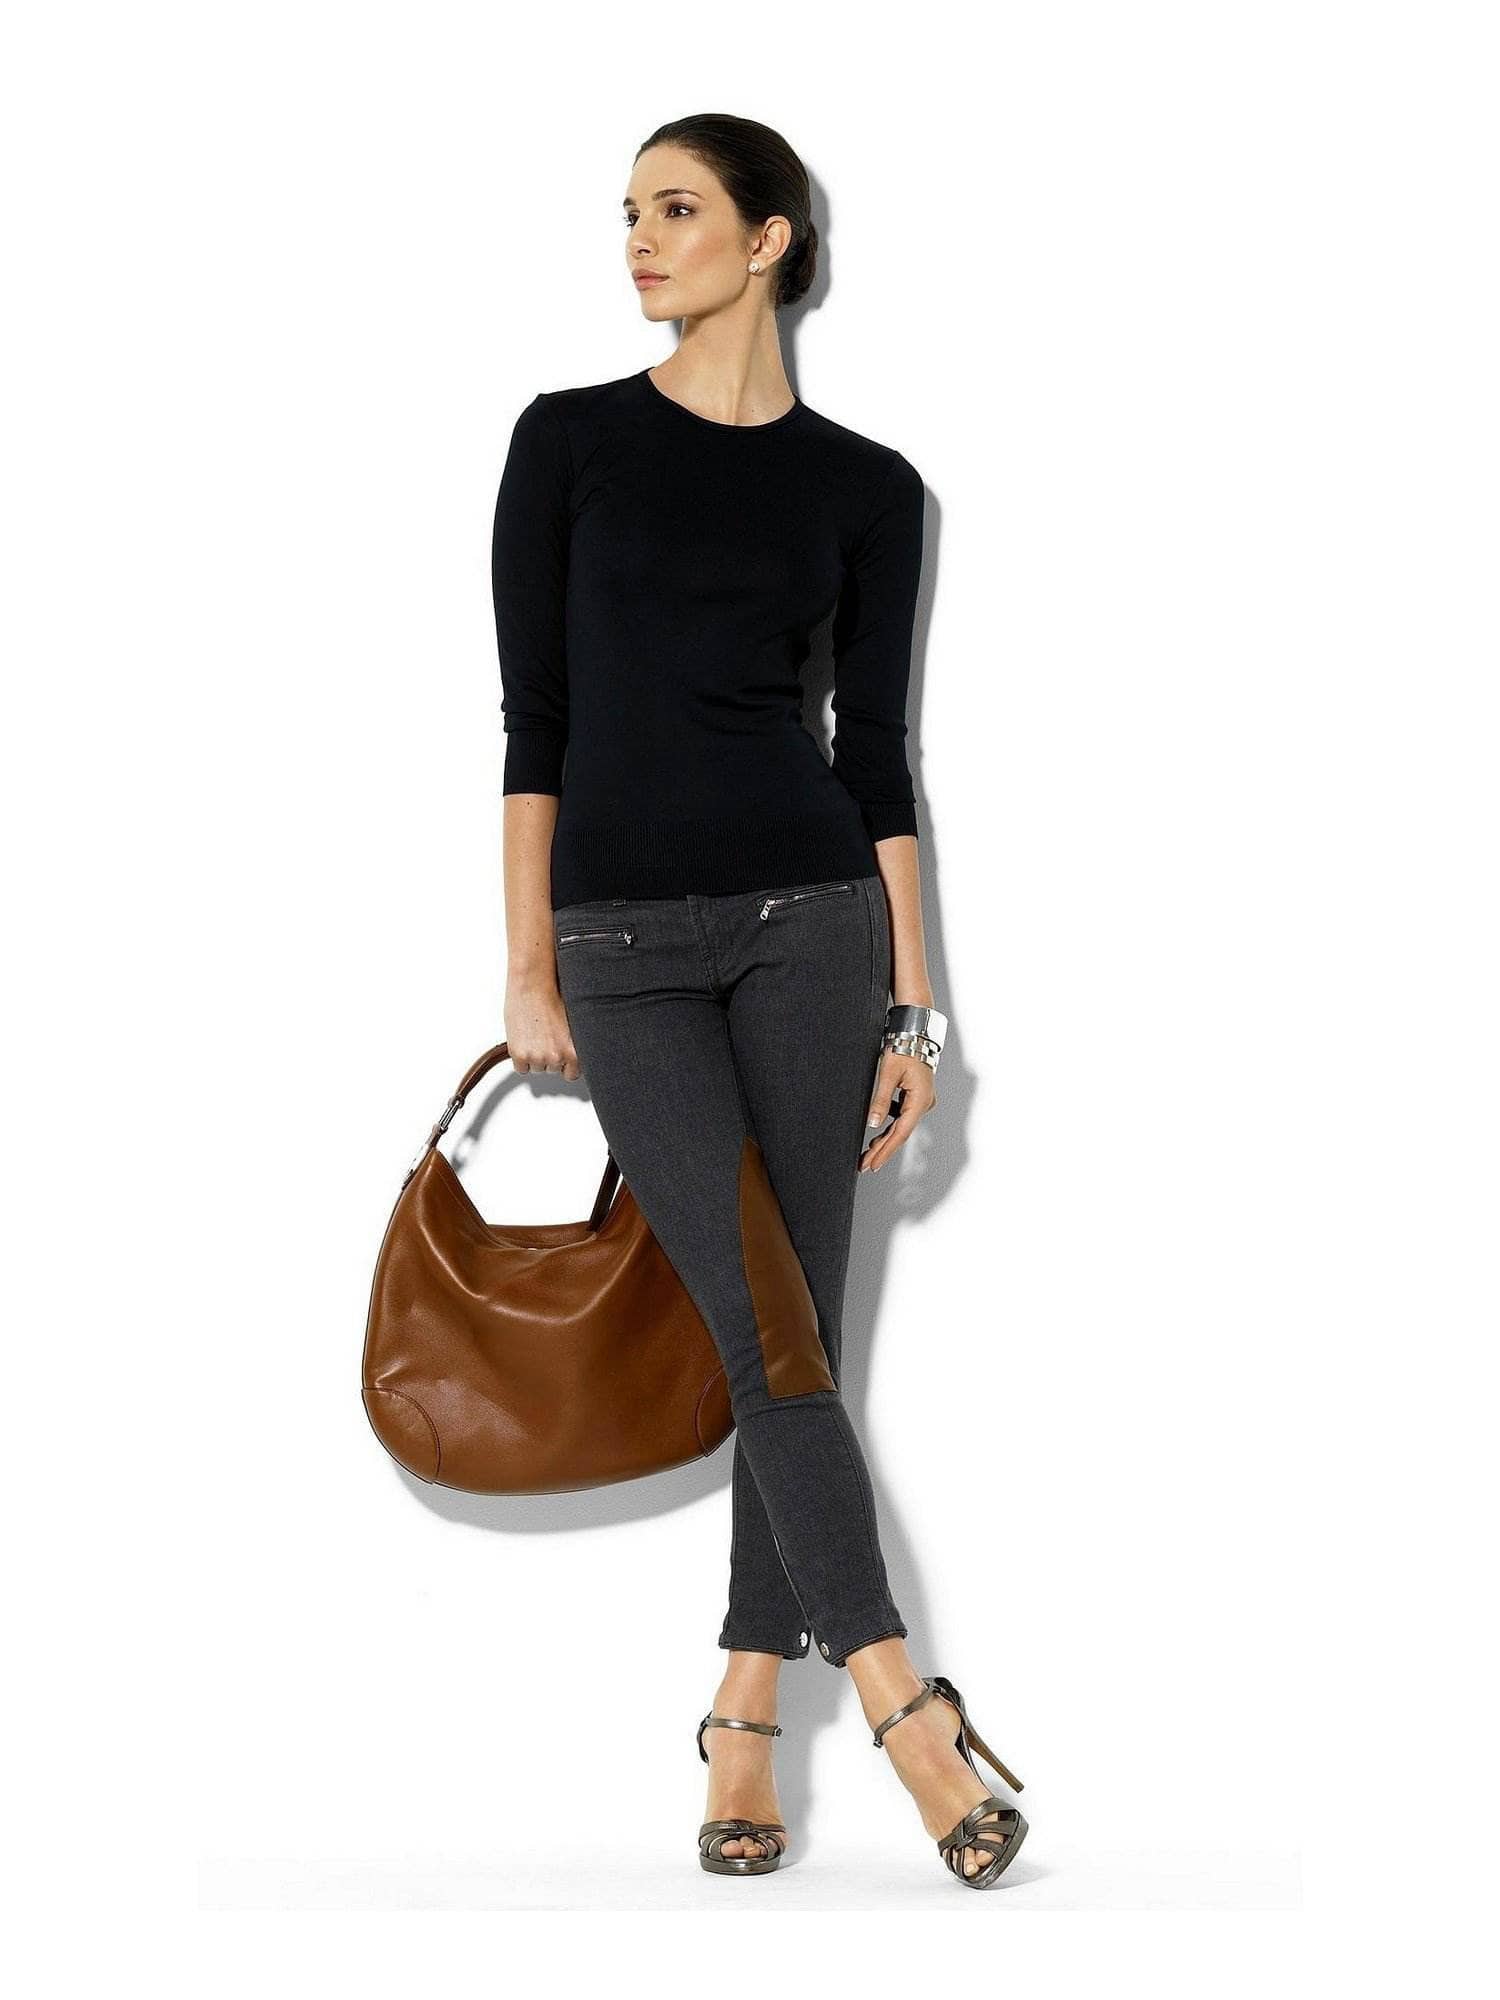 annabelle-demo1 Tops XS / Black Cashmere Longsleeve Top